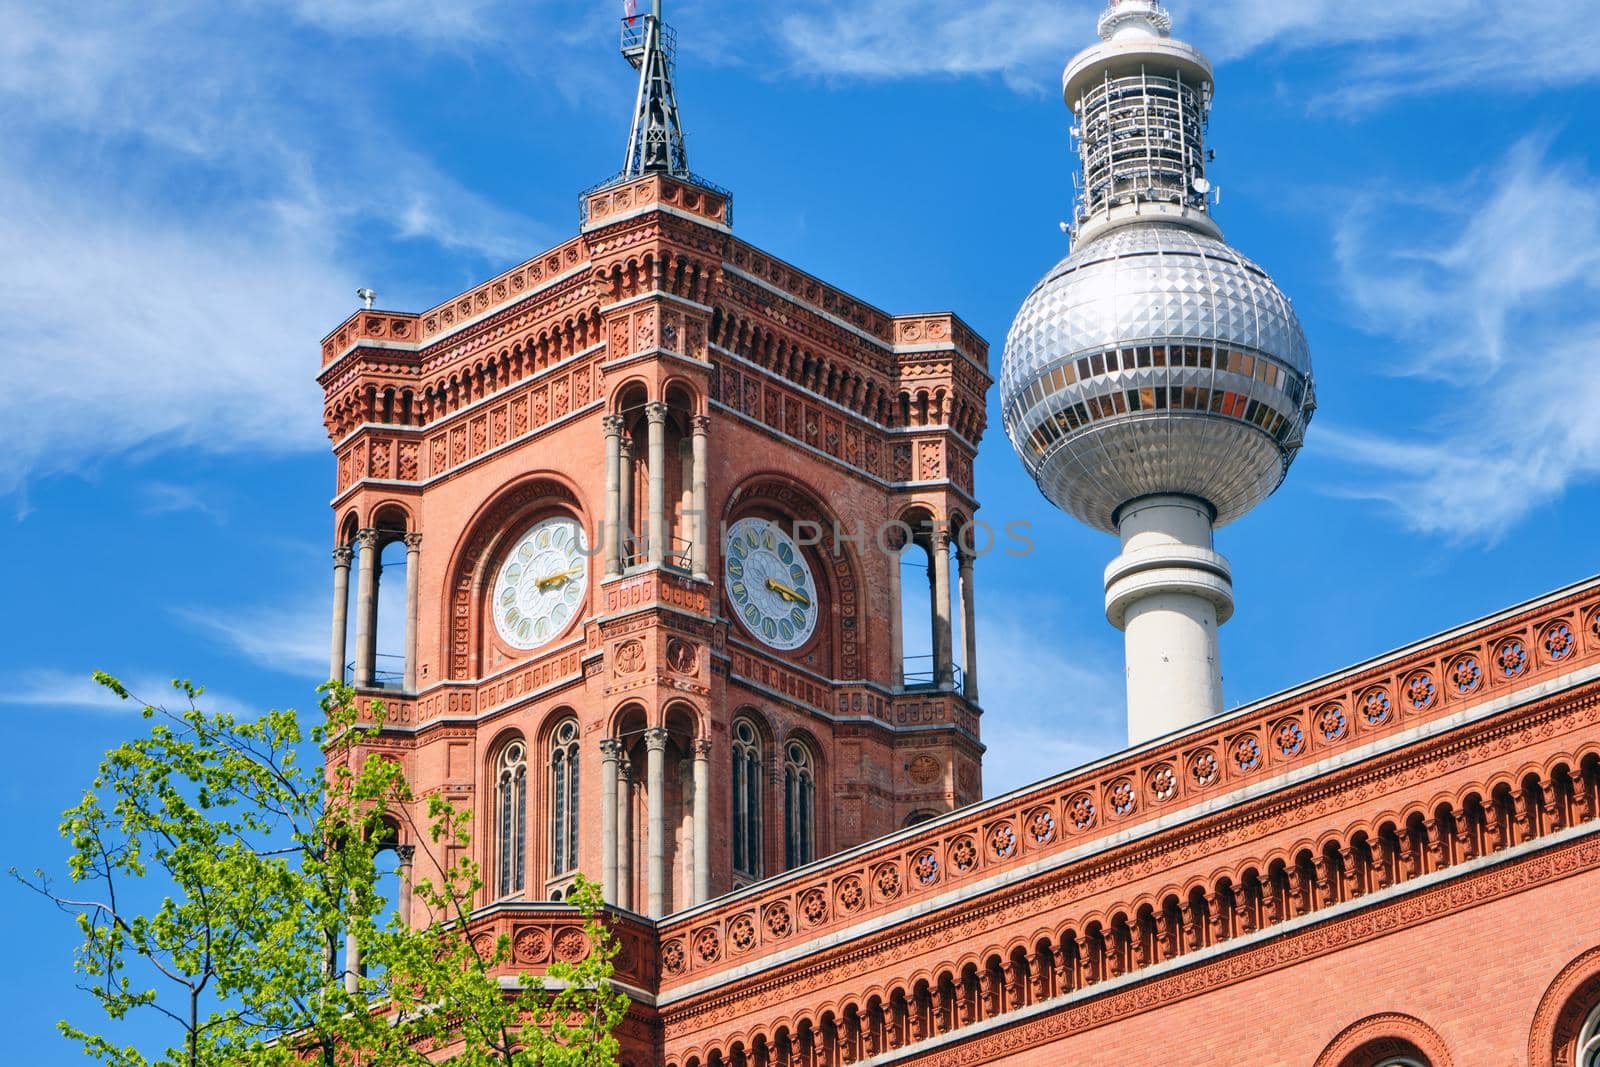 Detail of the tower of the Rotes Rathaus in Berlin by elxeneize